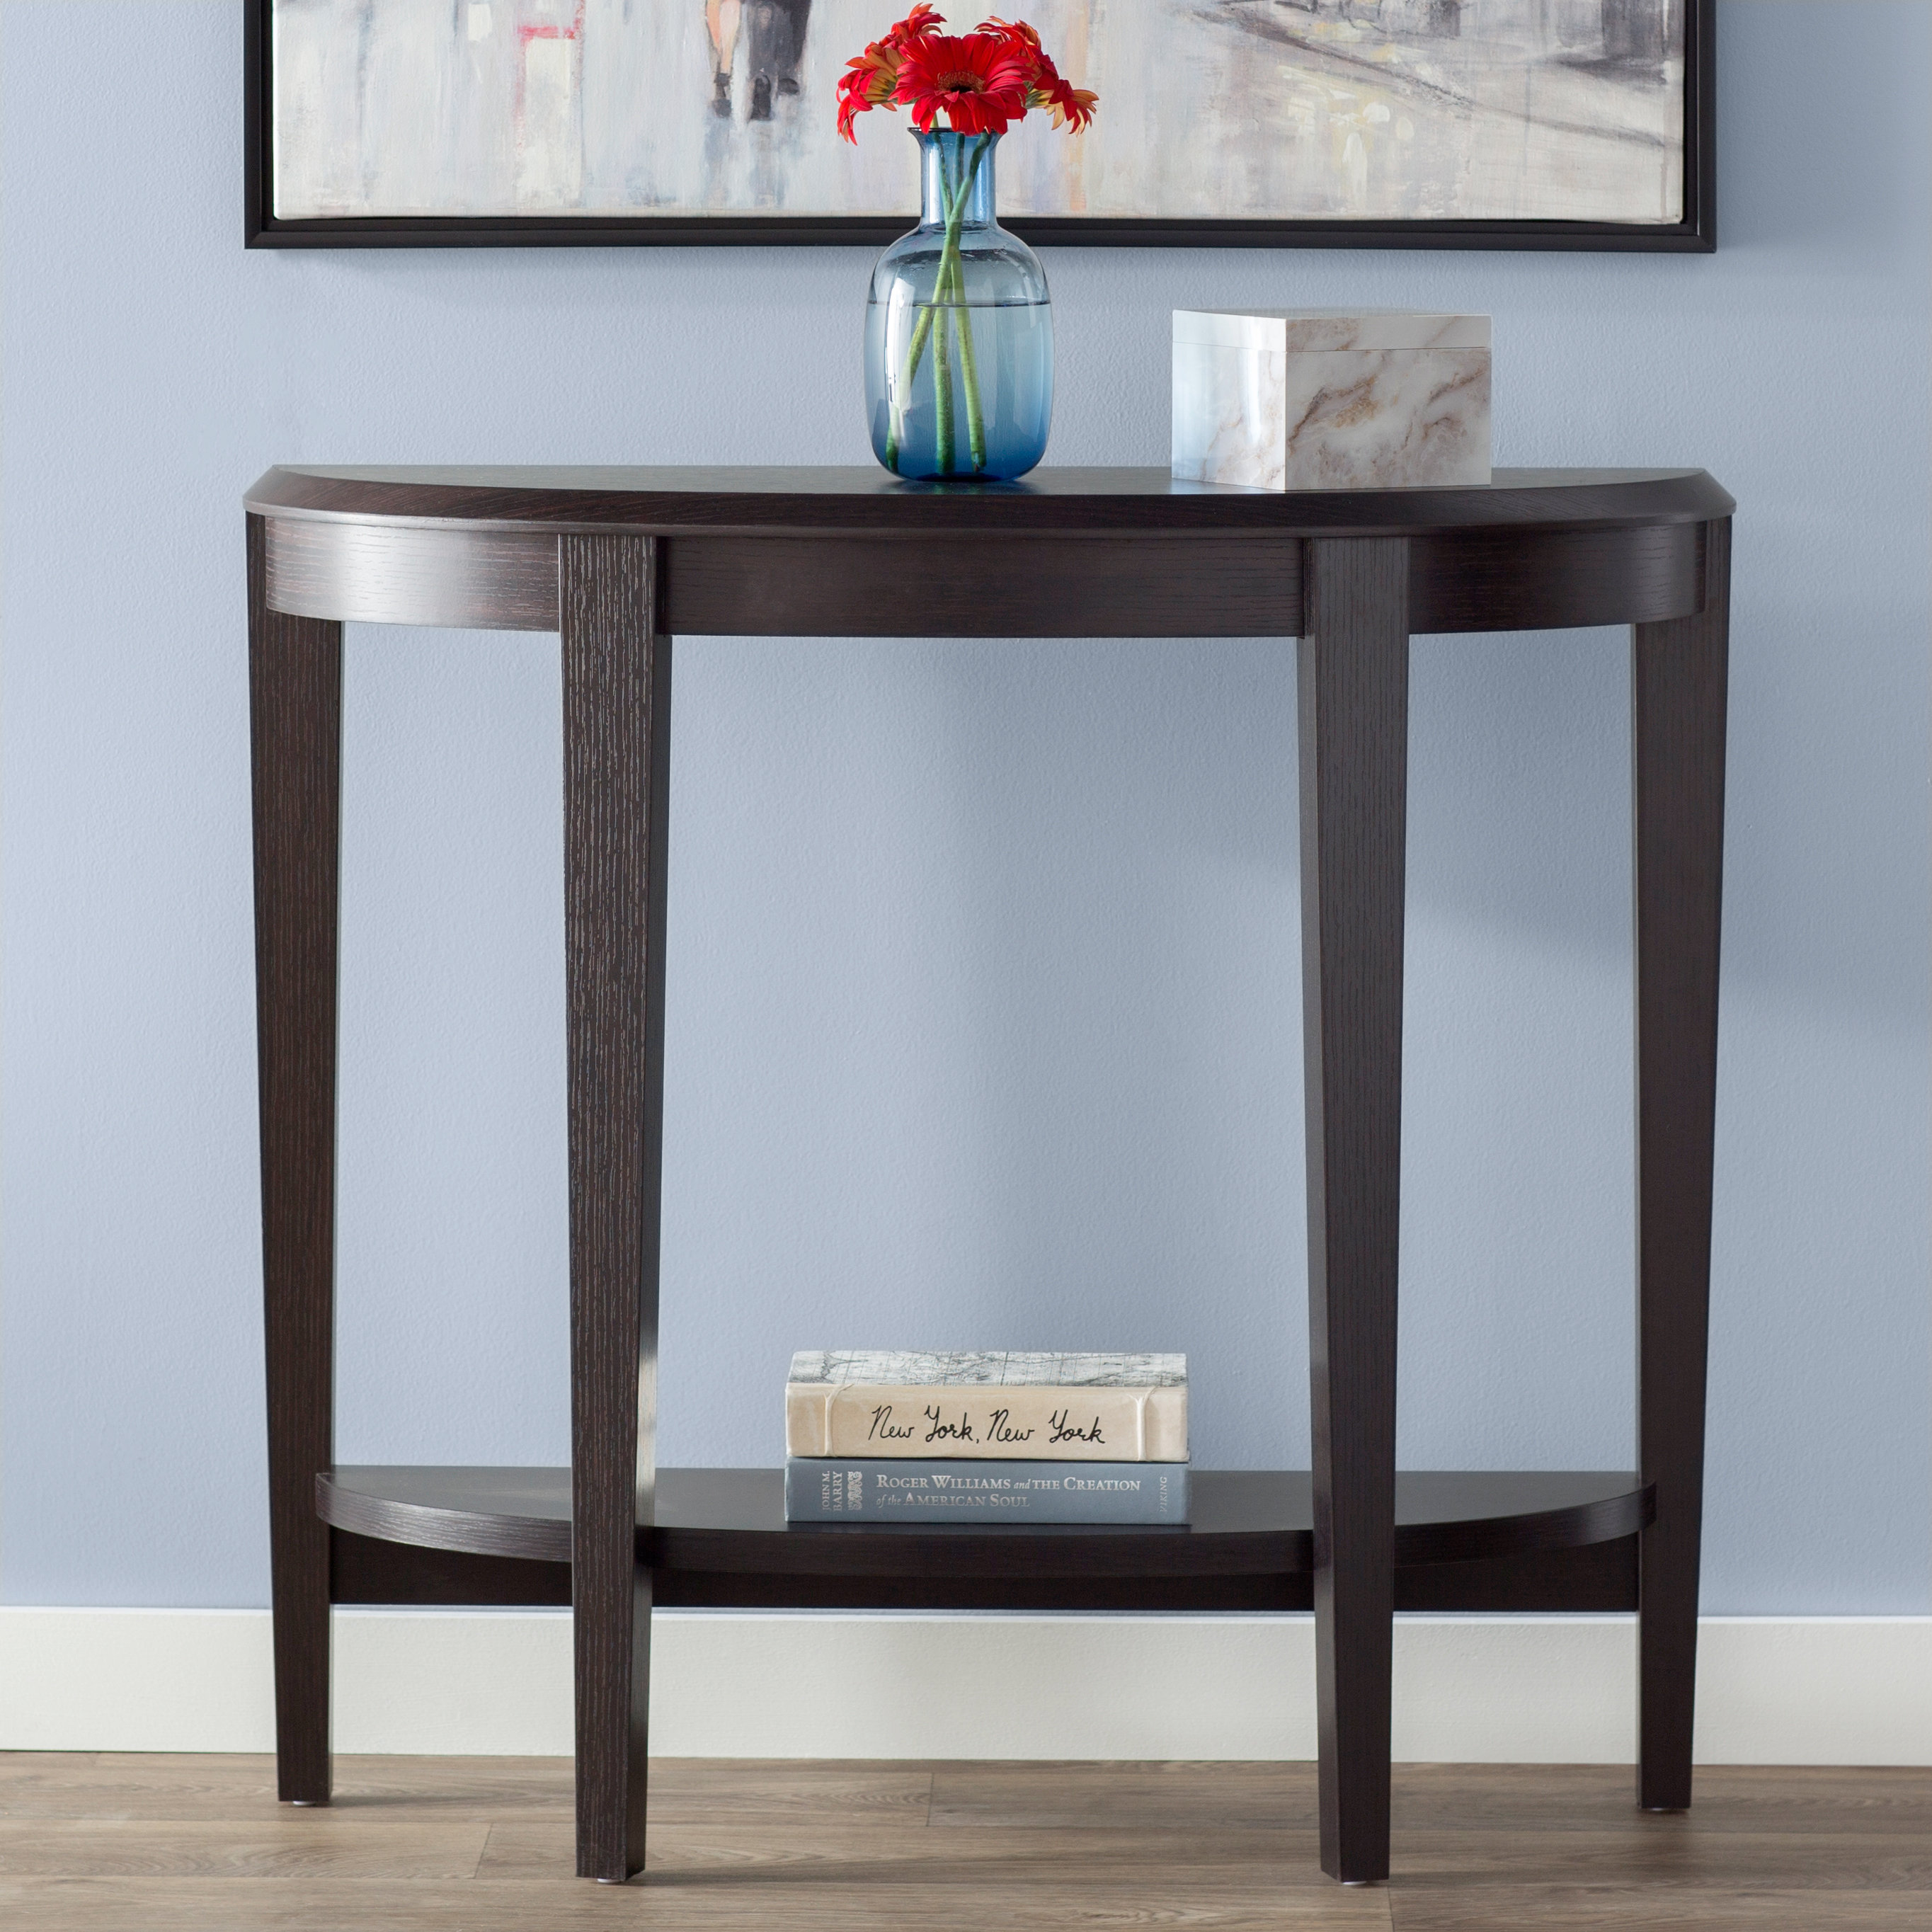 andover mills blakeway half moon console table reviews black accent nate berkus round gold with marble top pier one nesting tables antique folding meyda tiffany ceiling light nest